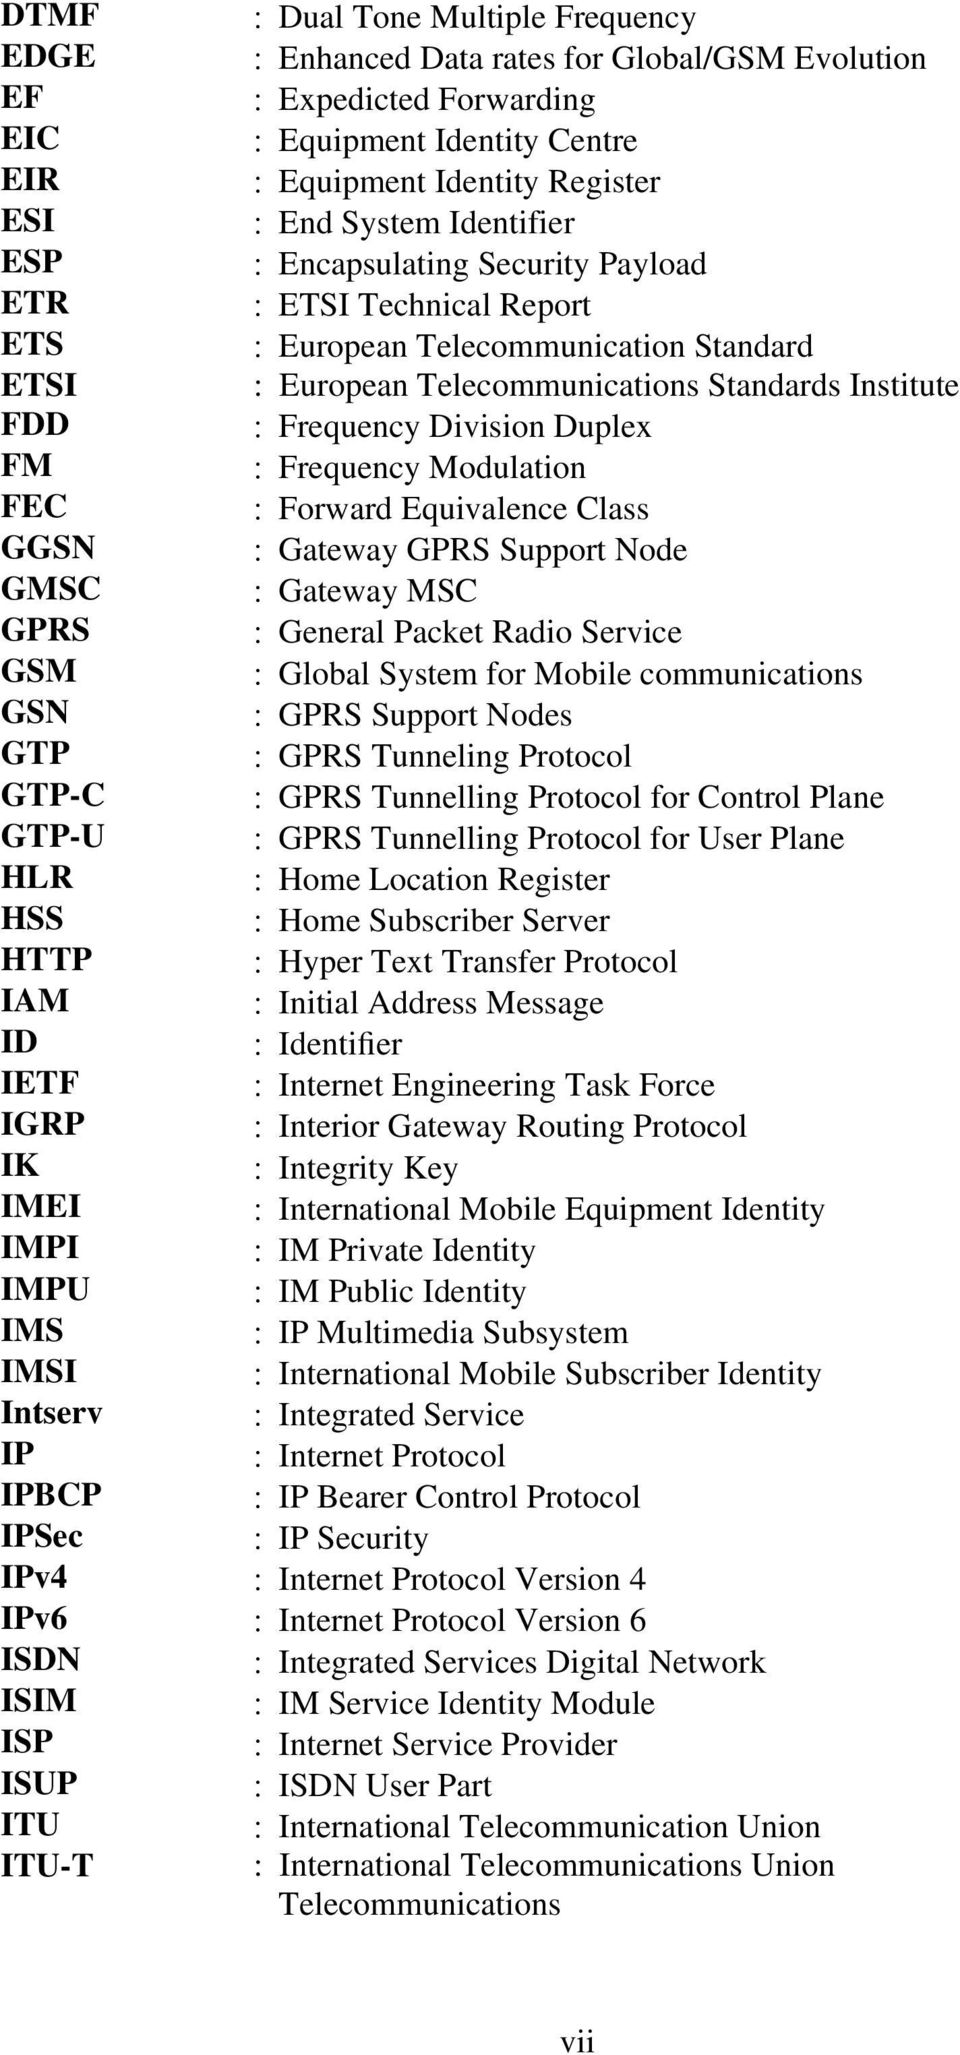 Duplex FM : Frequency Modulation FEC : Forward Equivalence Class GGSN : Gateway GPRS Support Node GMSC : Gateway MSC GPRS : General Packet Radio Service GSM : Global System for Mobile communications